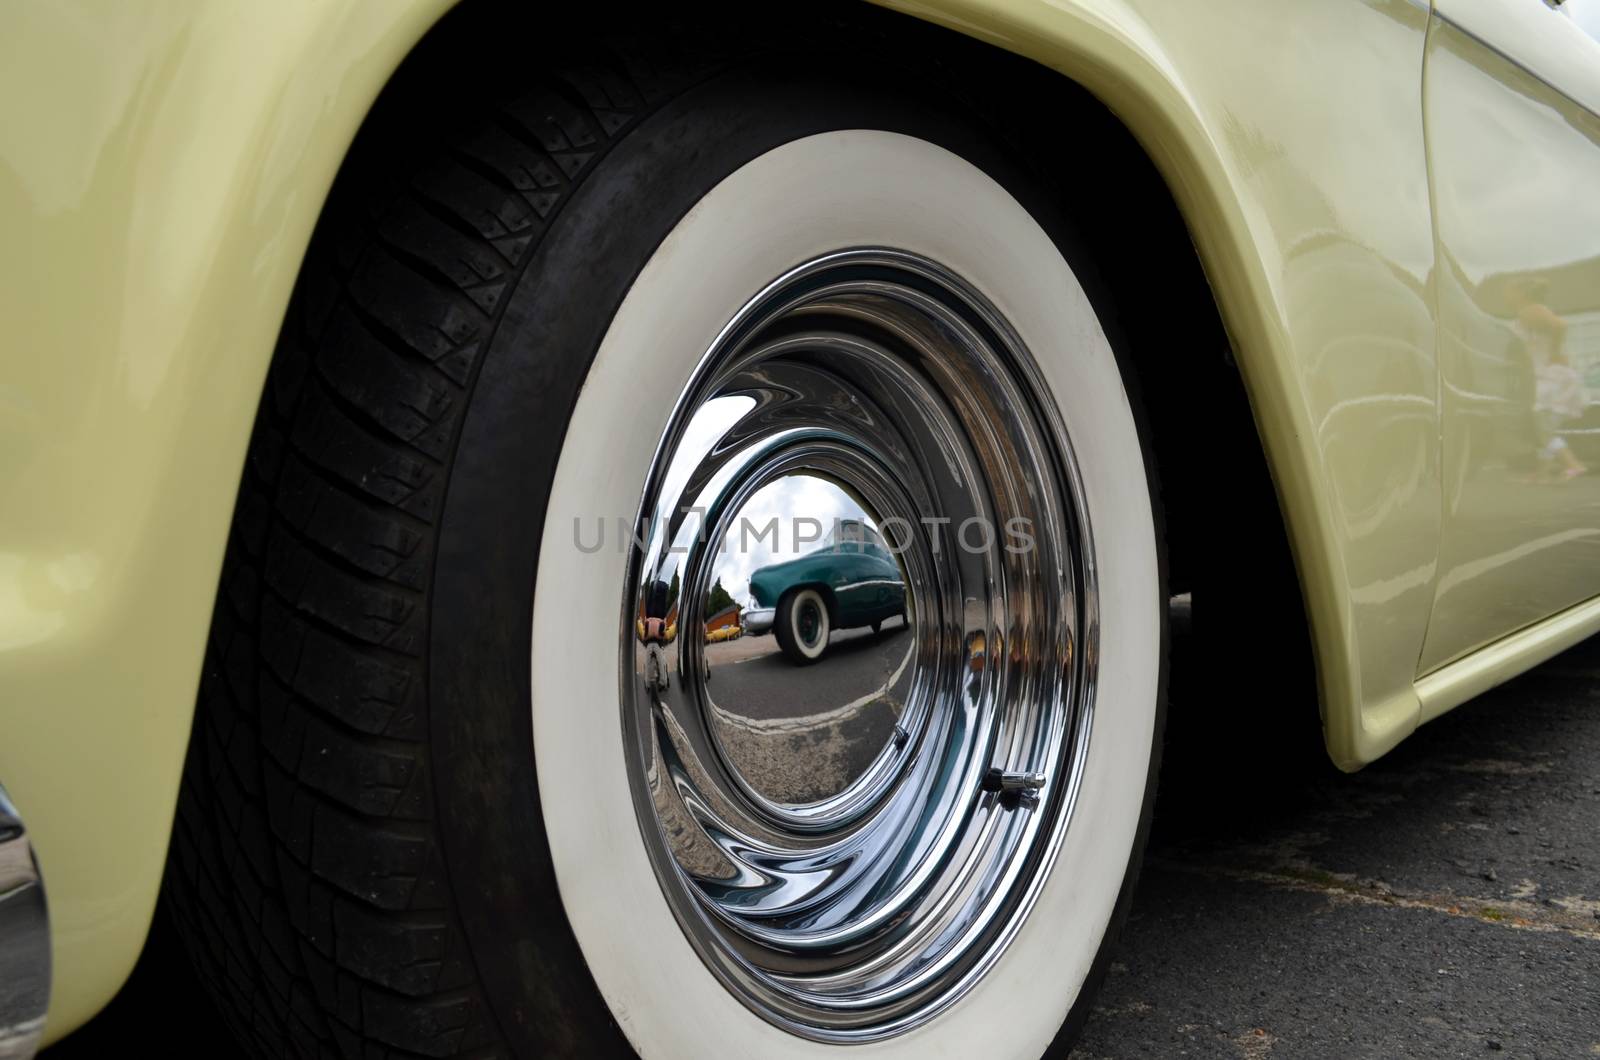 Custom car being reflected in another hotrods wheel hubcaps at a hotrod show in England.